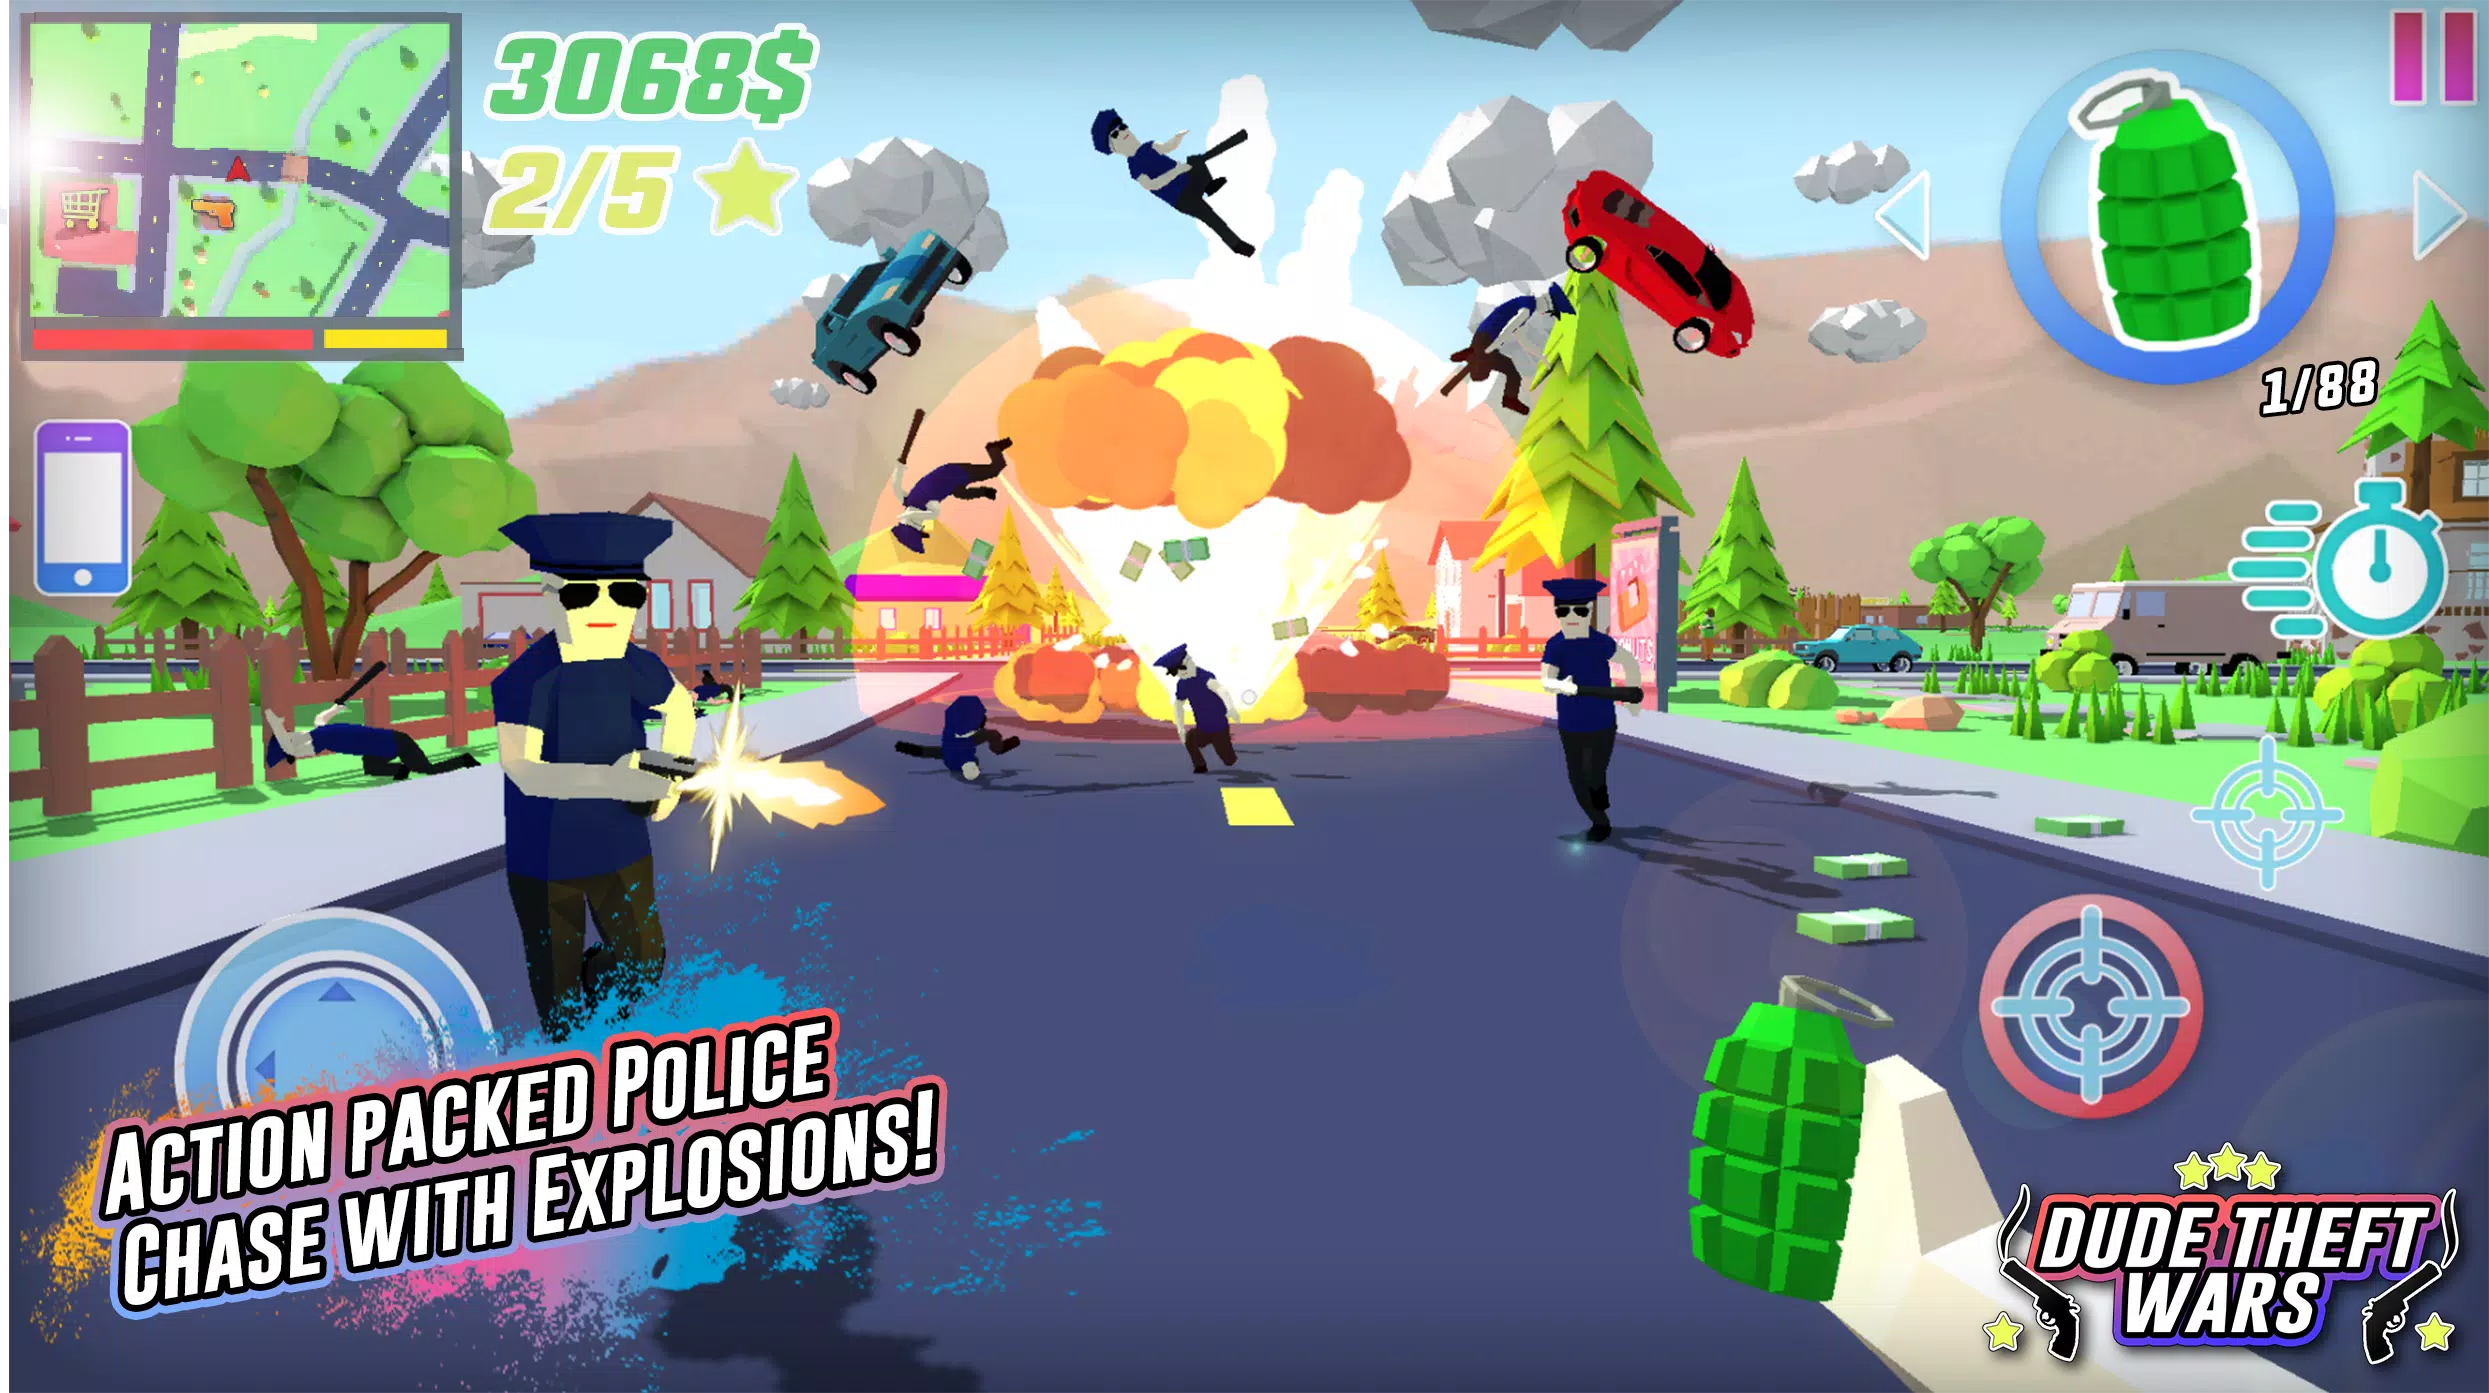 Dude Theft Wars for Android - APK Download